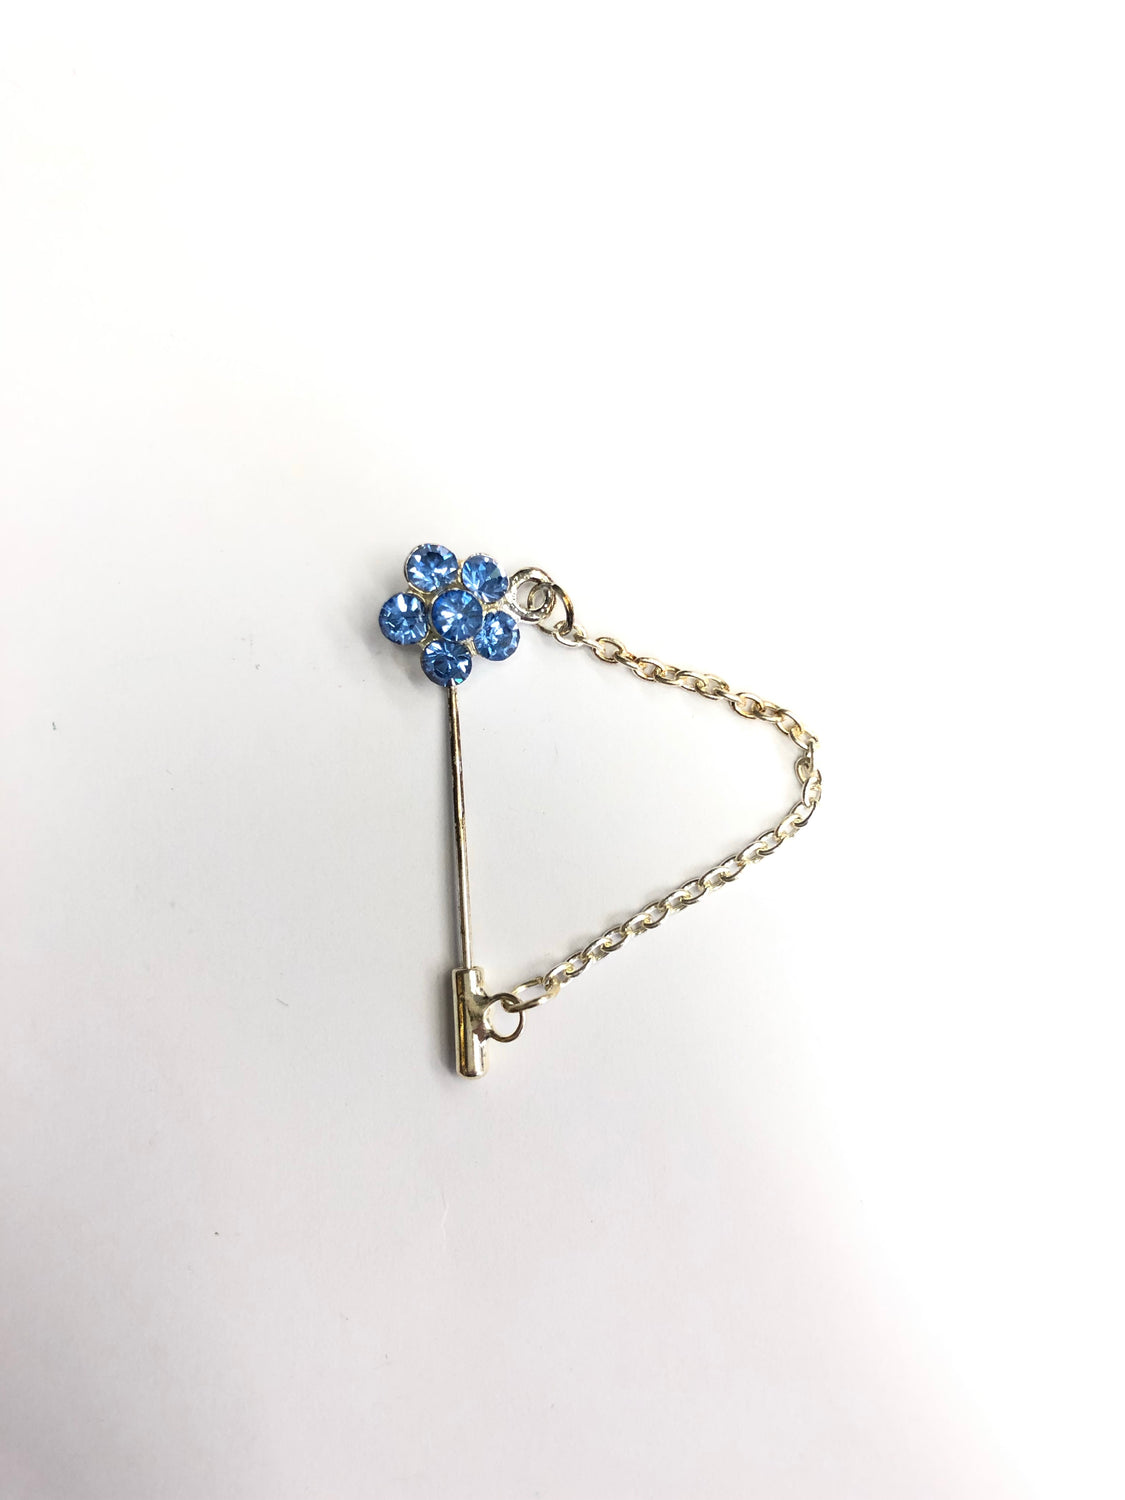 silver clasp pin with blue floral jewel and a chain